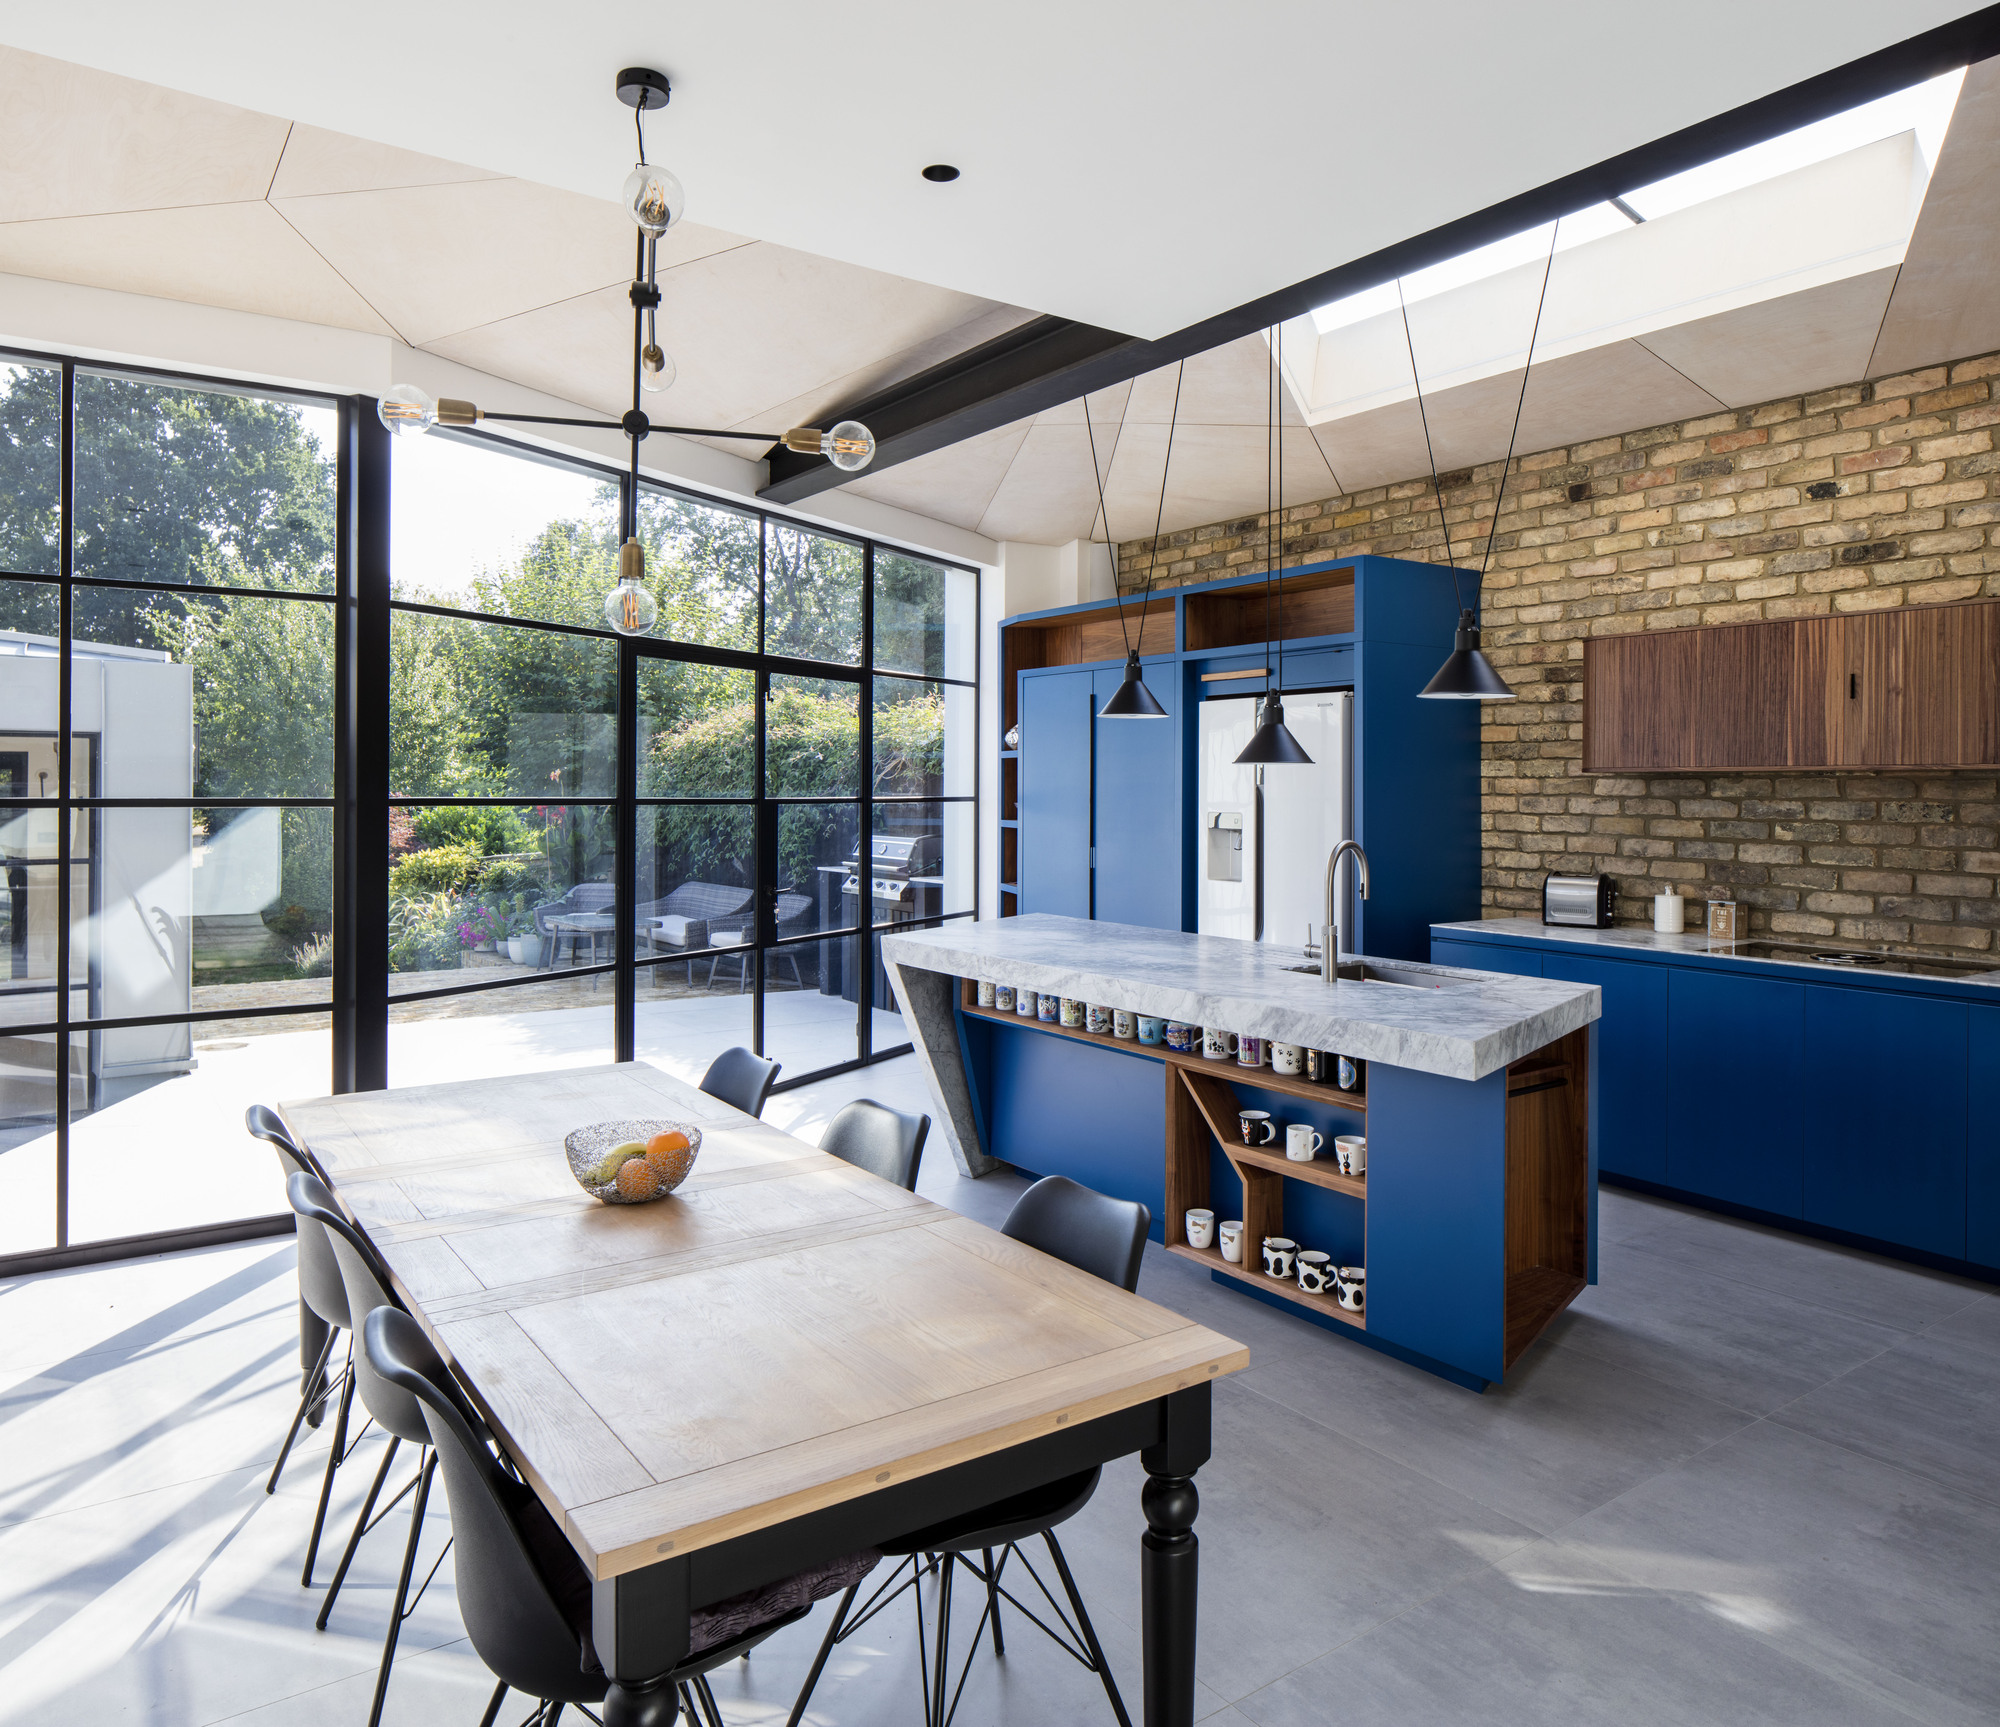 Renovated Victorian home dining area and kitchen with exposed brick wall and blue cabinets